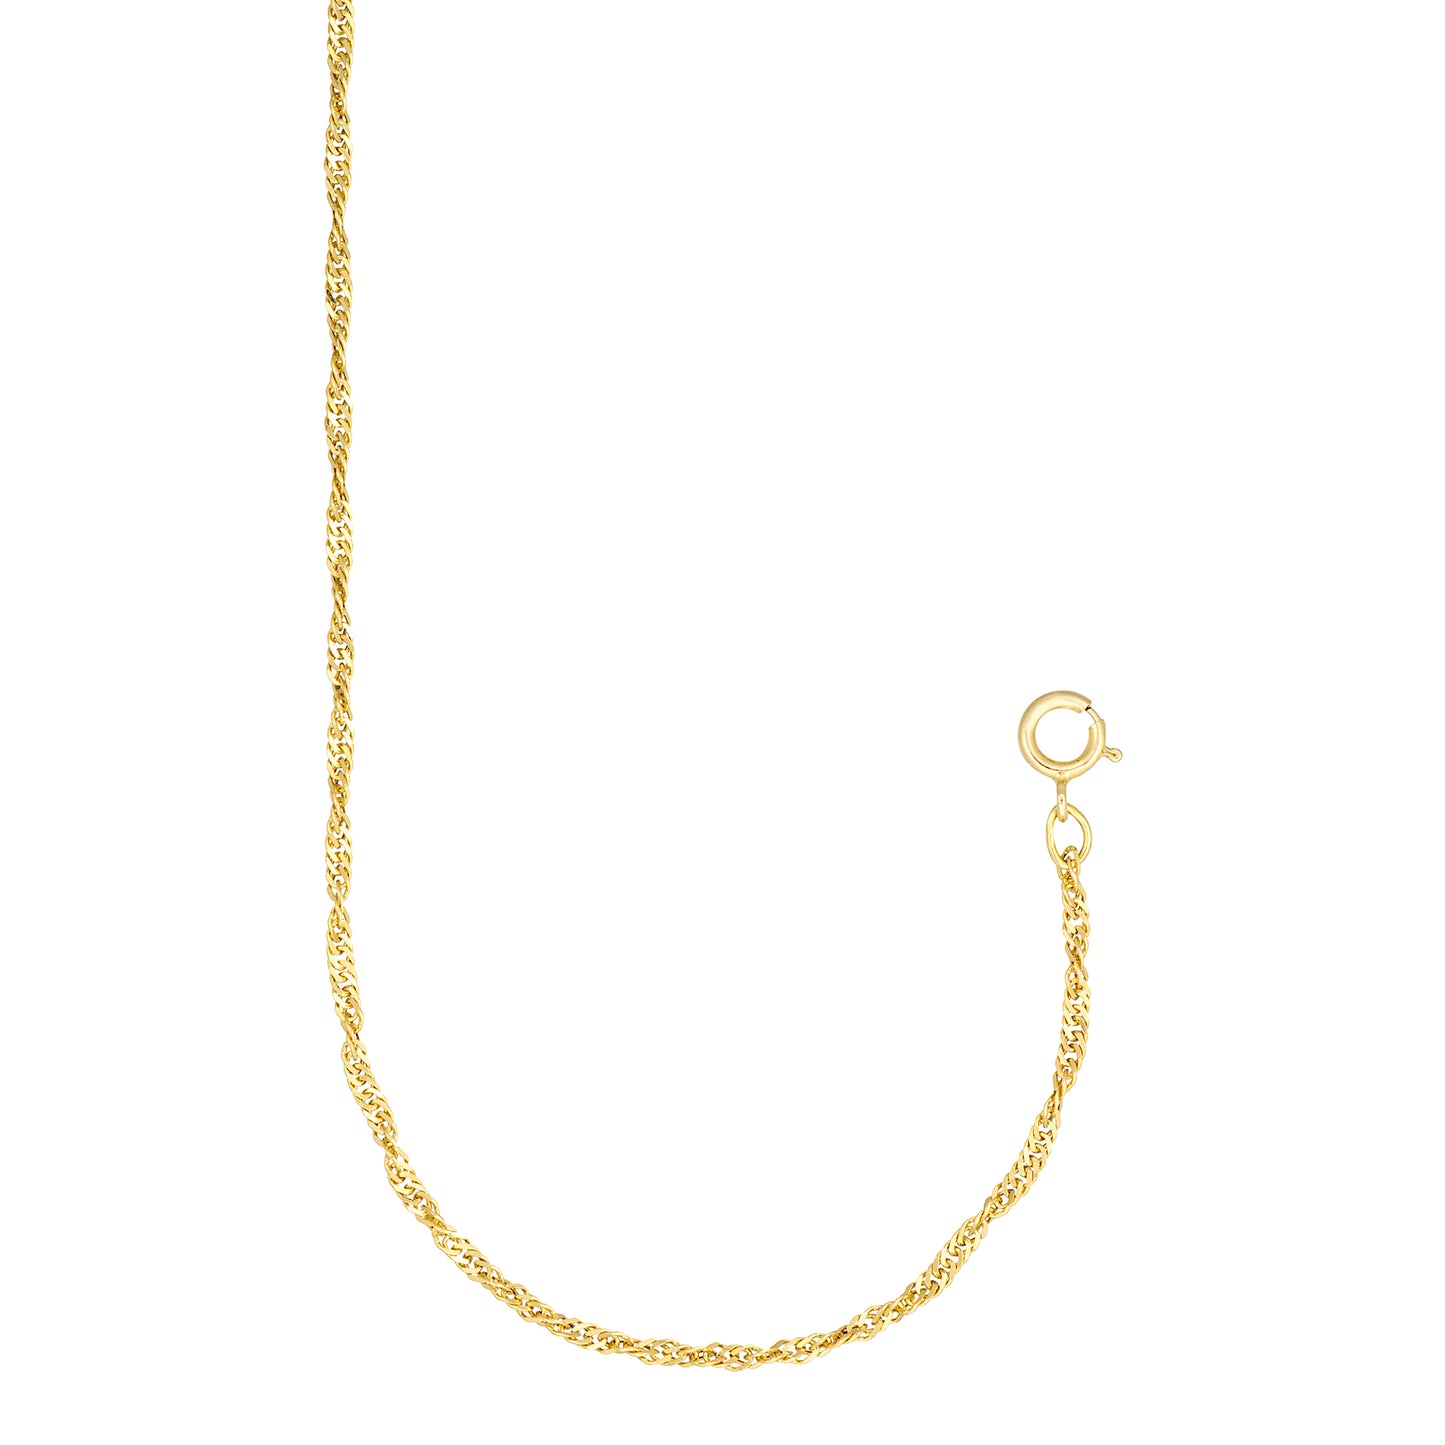 10K Yellow Gold Singapore Necklace